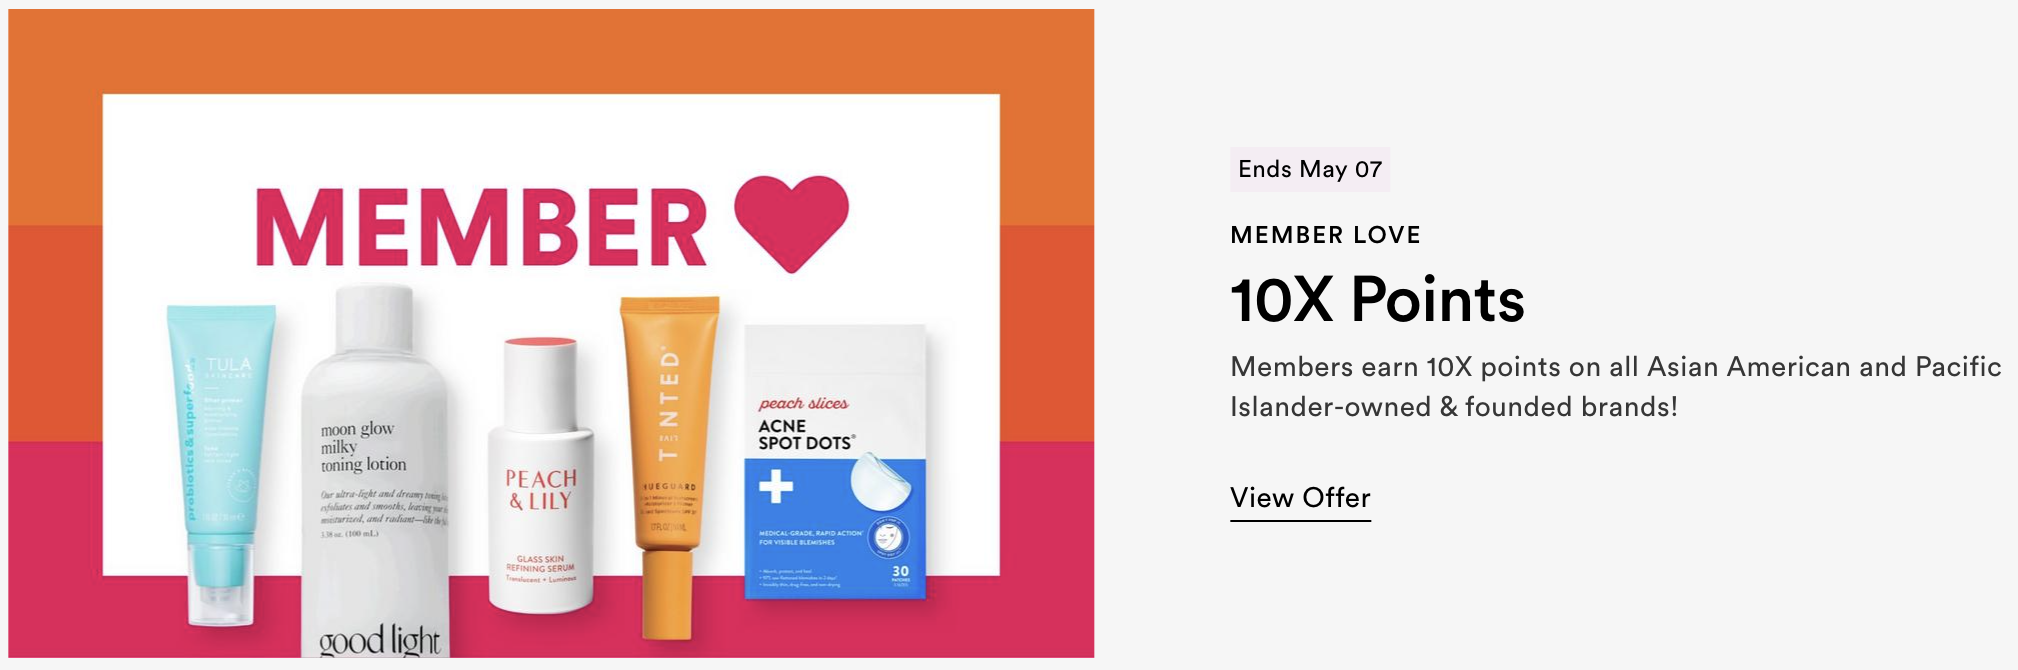 Ulta 10X points on all Asian American and Pacific Islanderowned